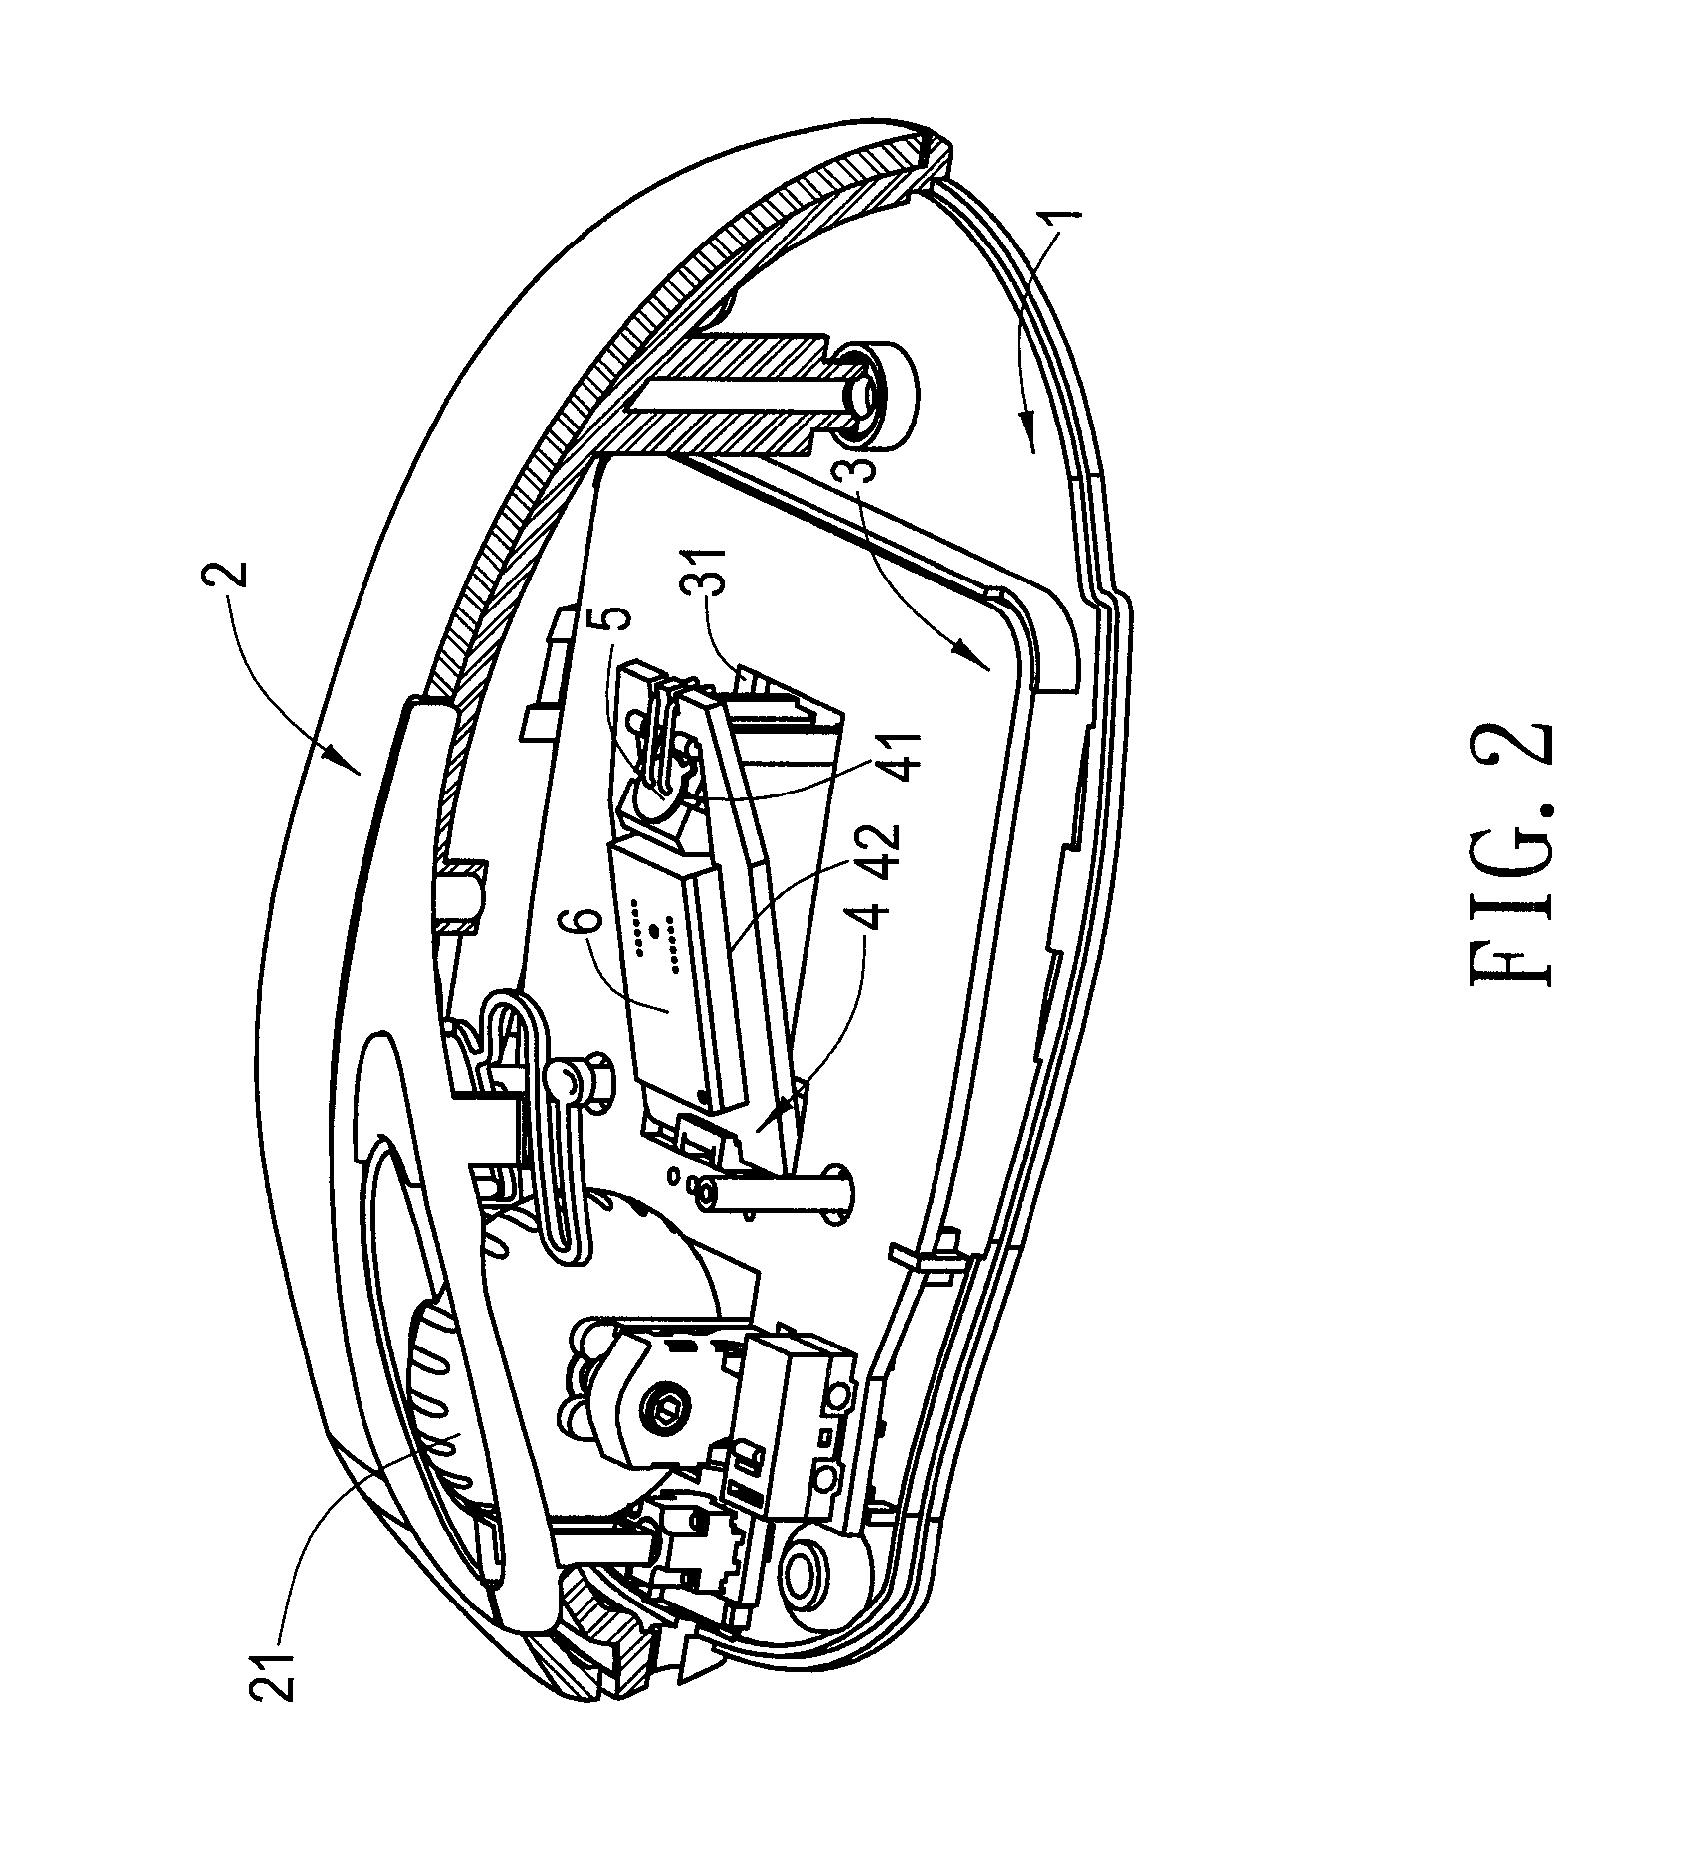 Optical mouse having an optical structure capable of high sensibility